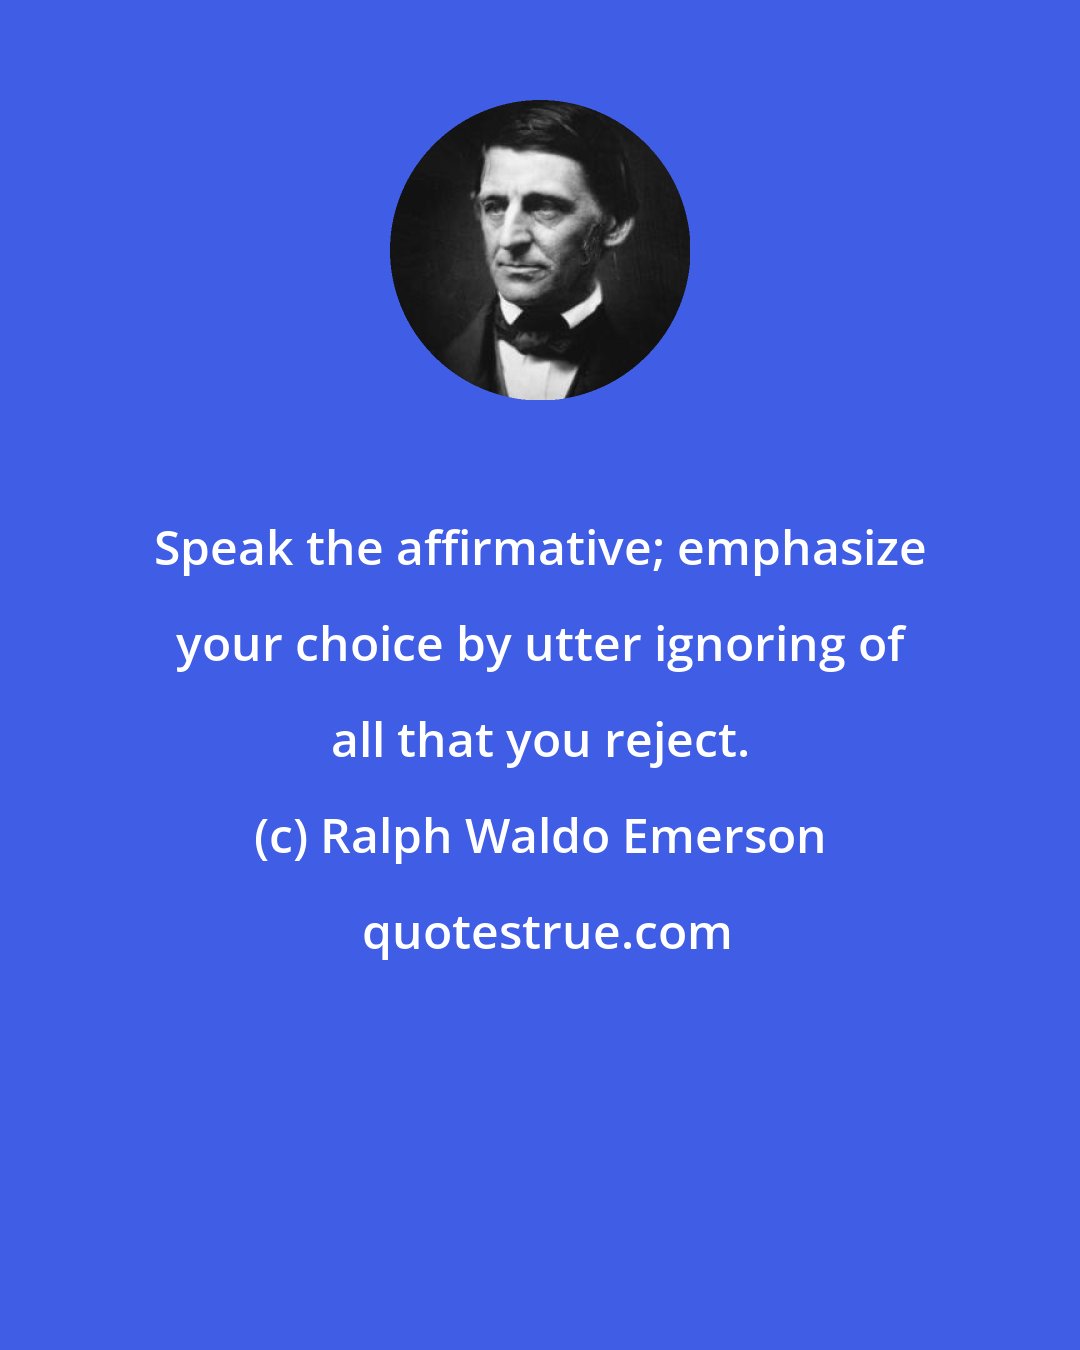 Ralph Waldo Emerson: Speak the affirmative; emphasize your choice by utter ignoring of all that you reject.